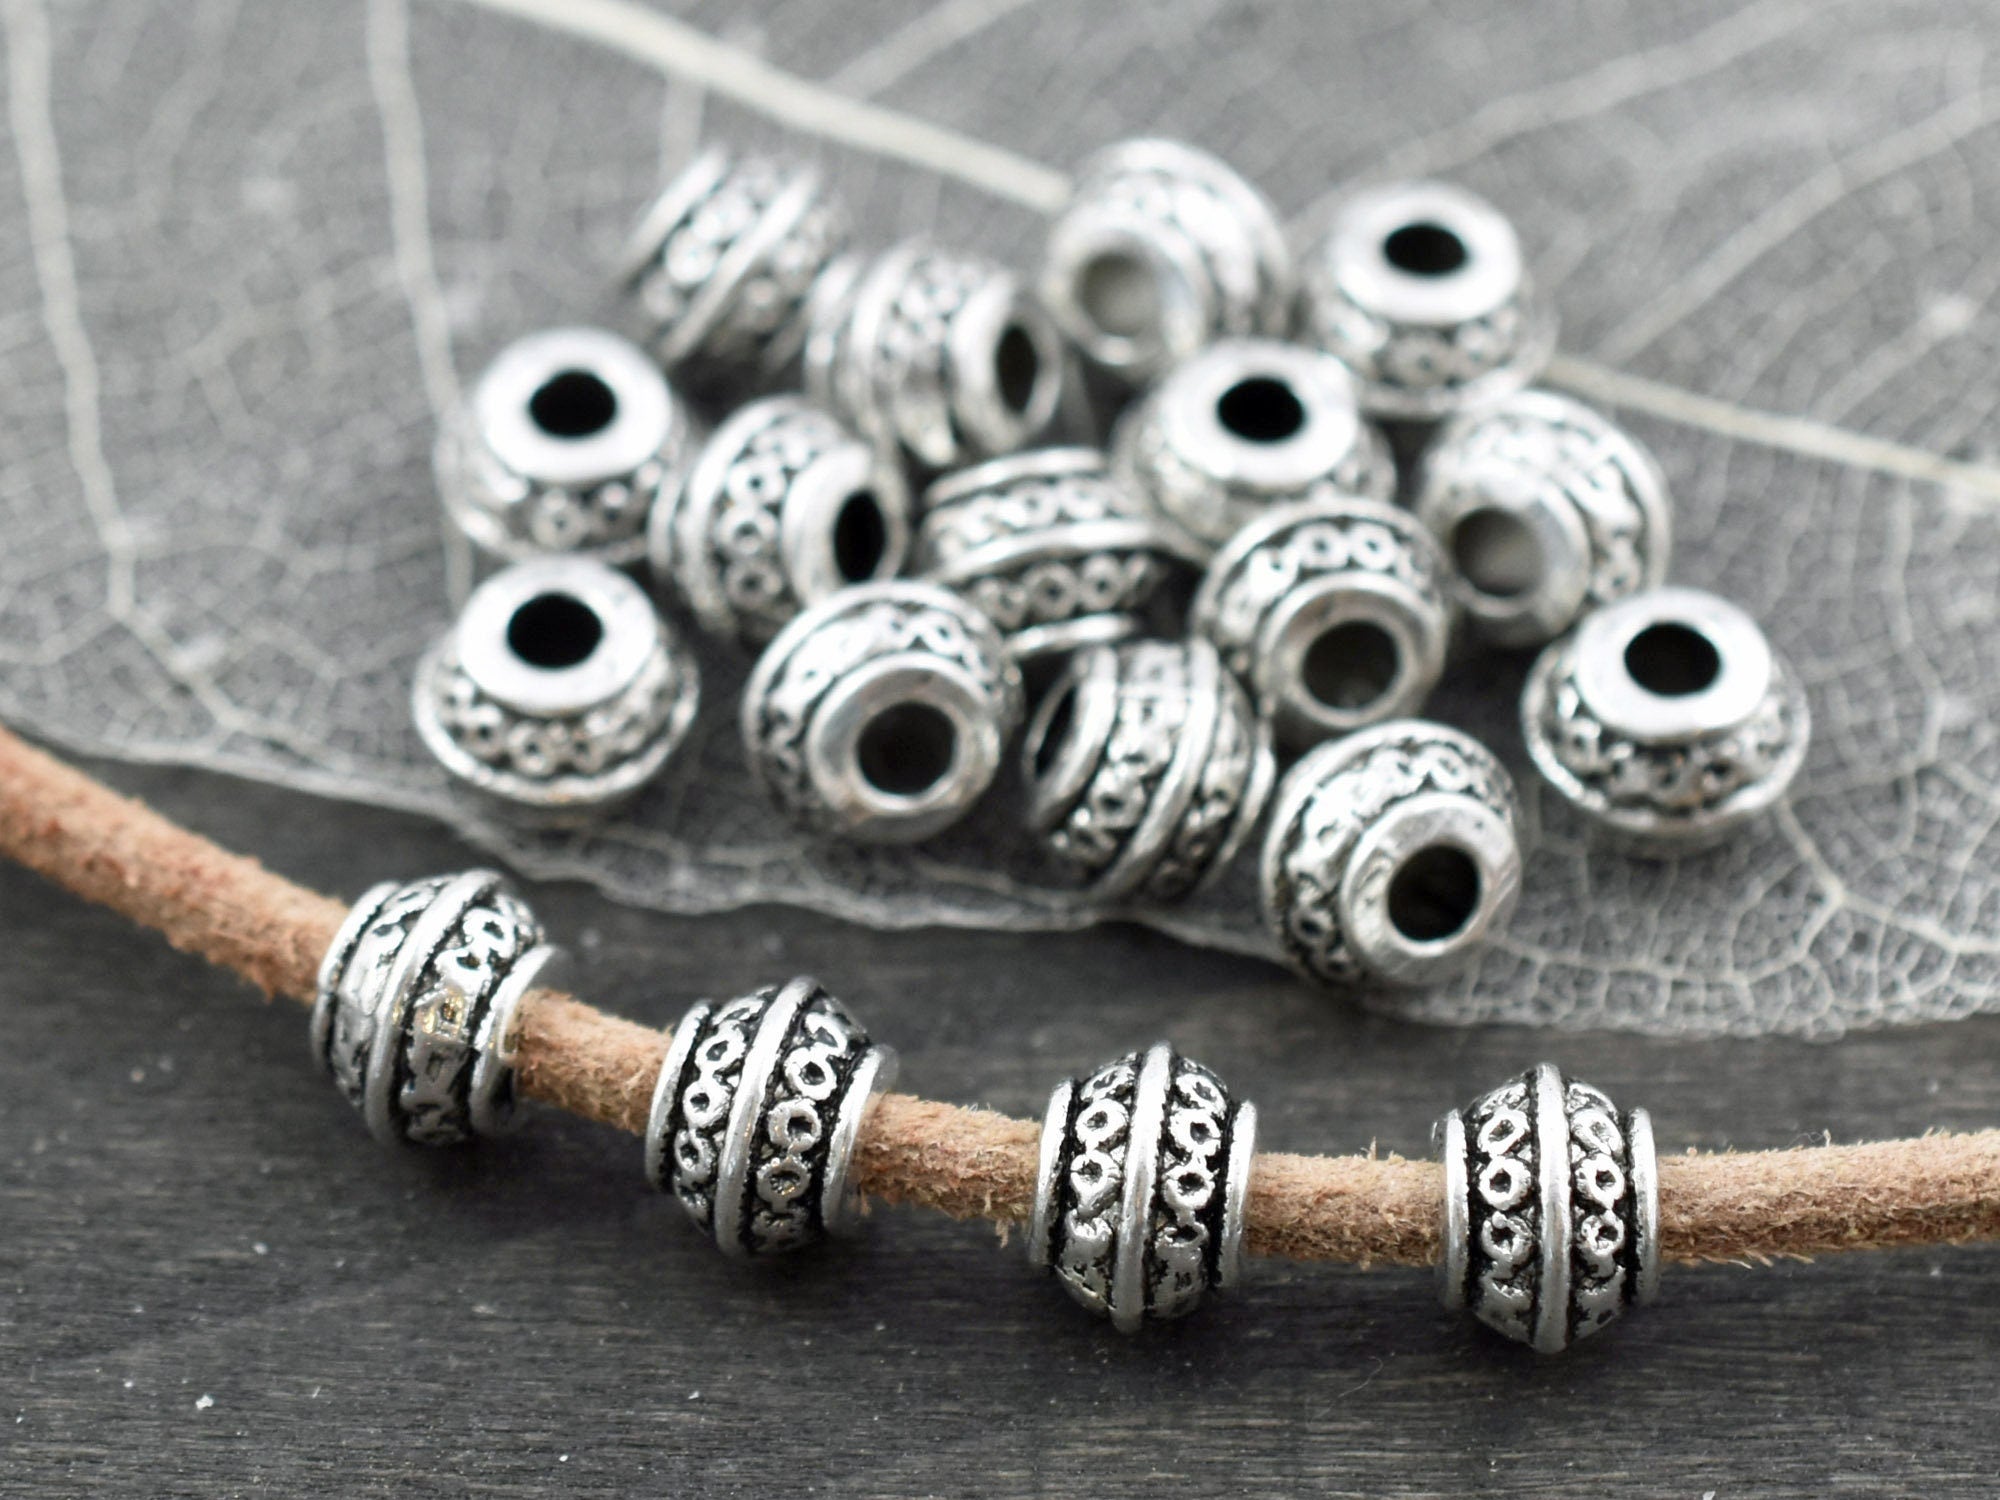 *100* 9x1mm Antique Silver Wavy Disc Spacer Beads Czech Glass Beads by GR8BEADS - The Bead Obsession